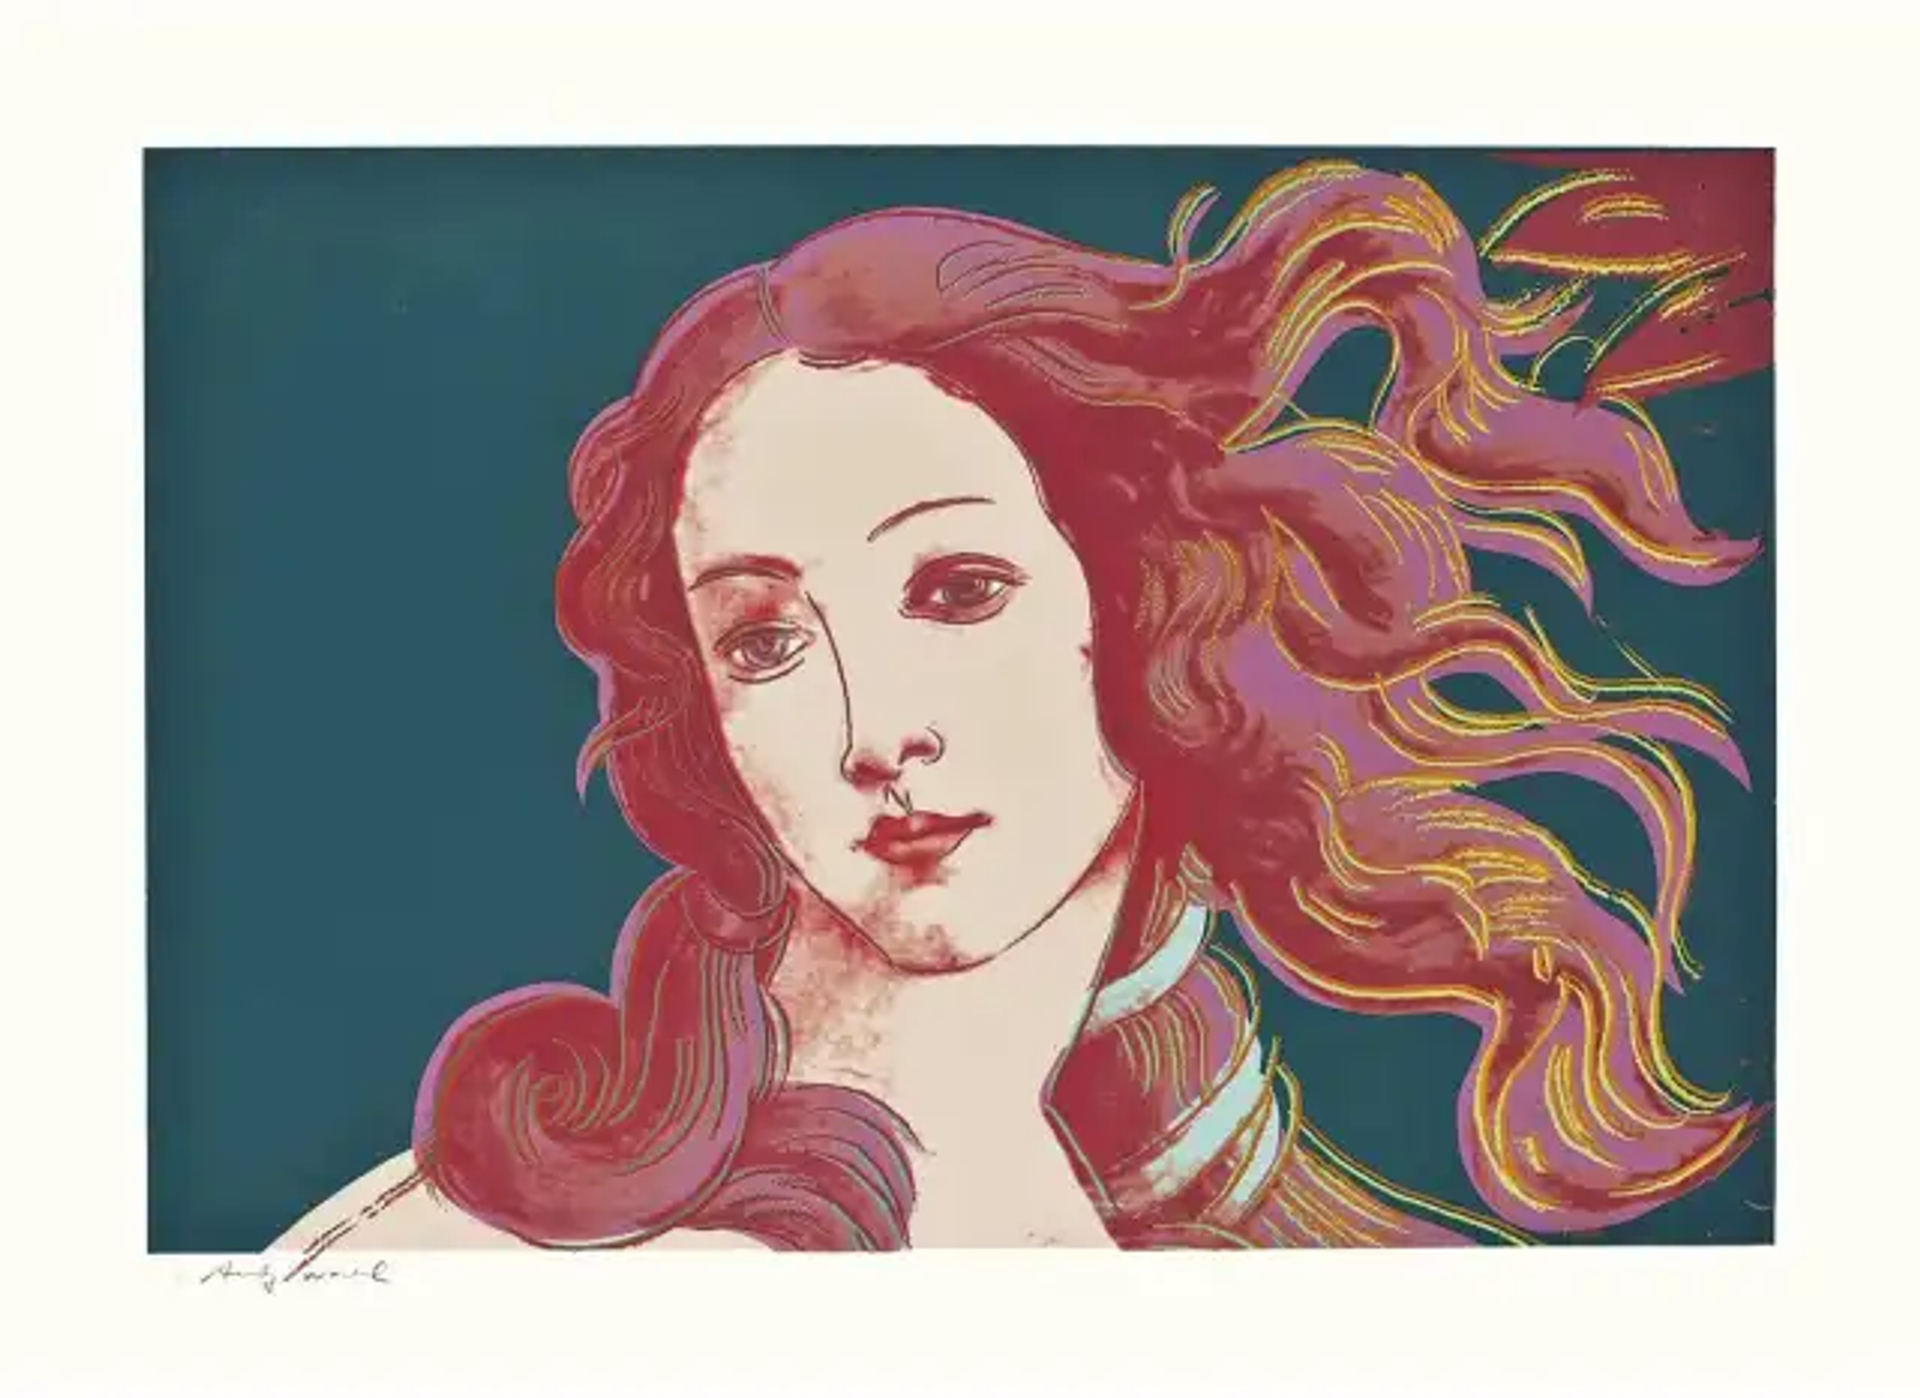 A close-up view of Botticelli's Venus, showing her face and flowing hair. The background is done in a dark teal, while her hair is in tones of red and pink.